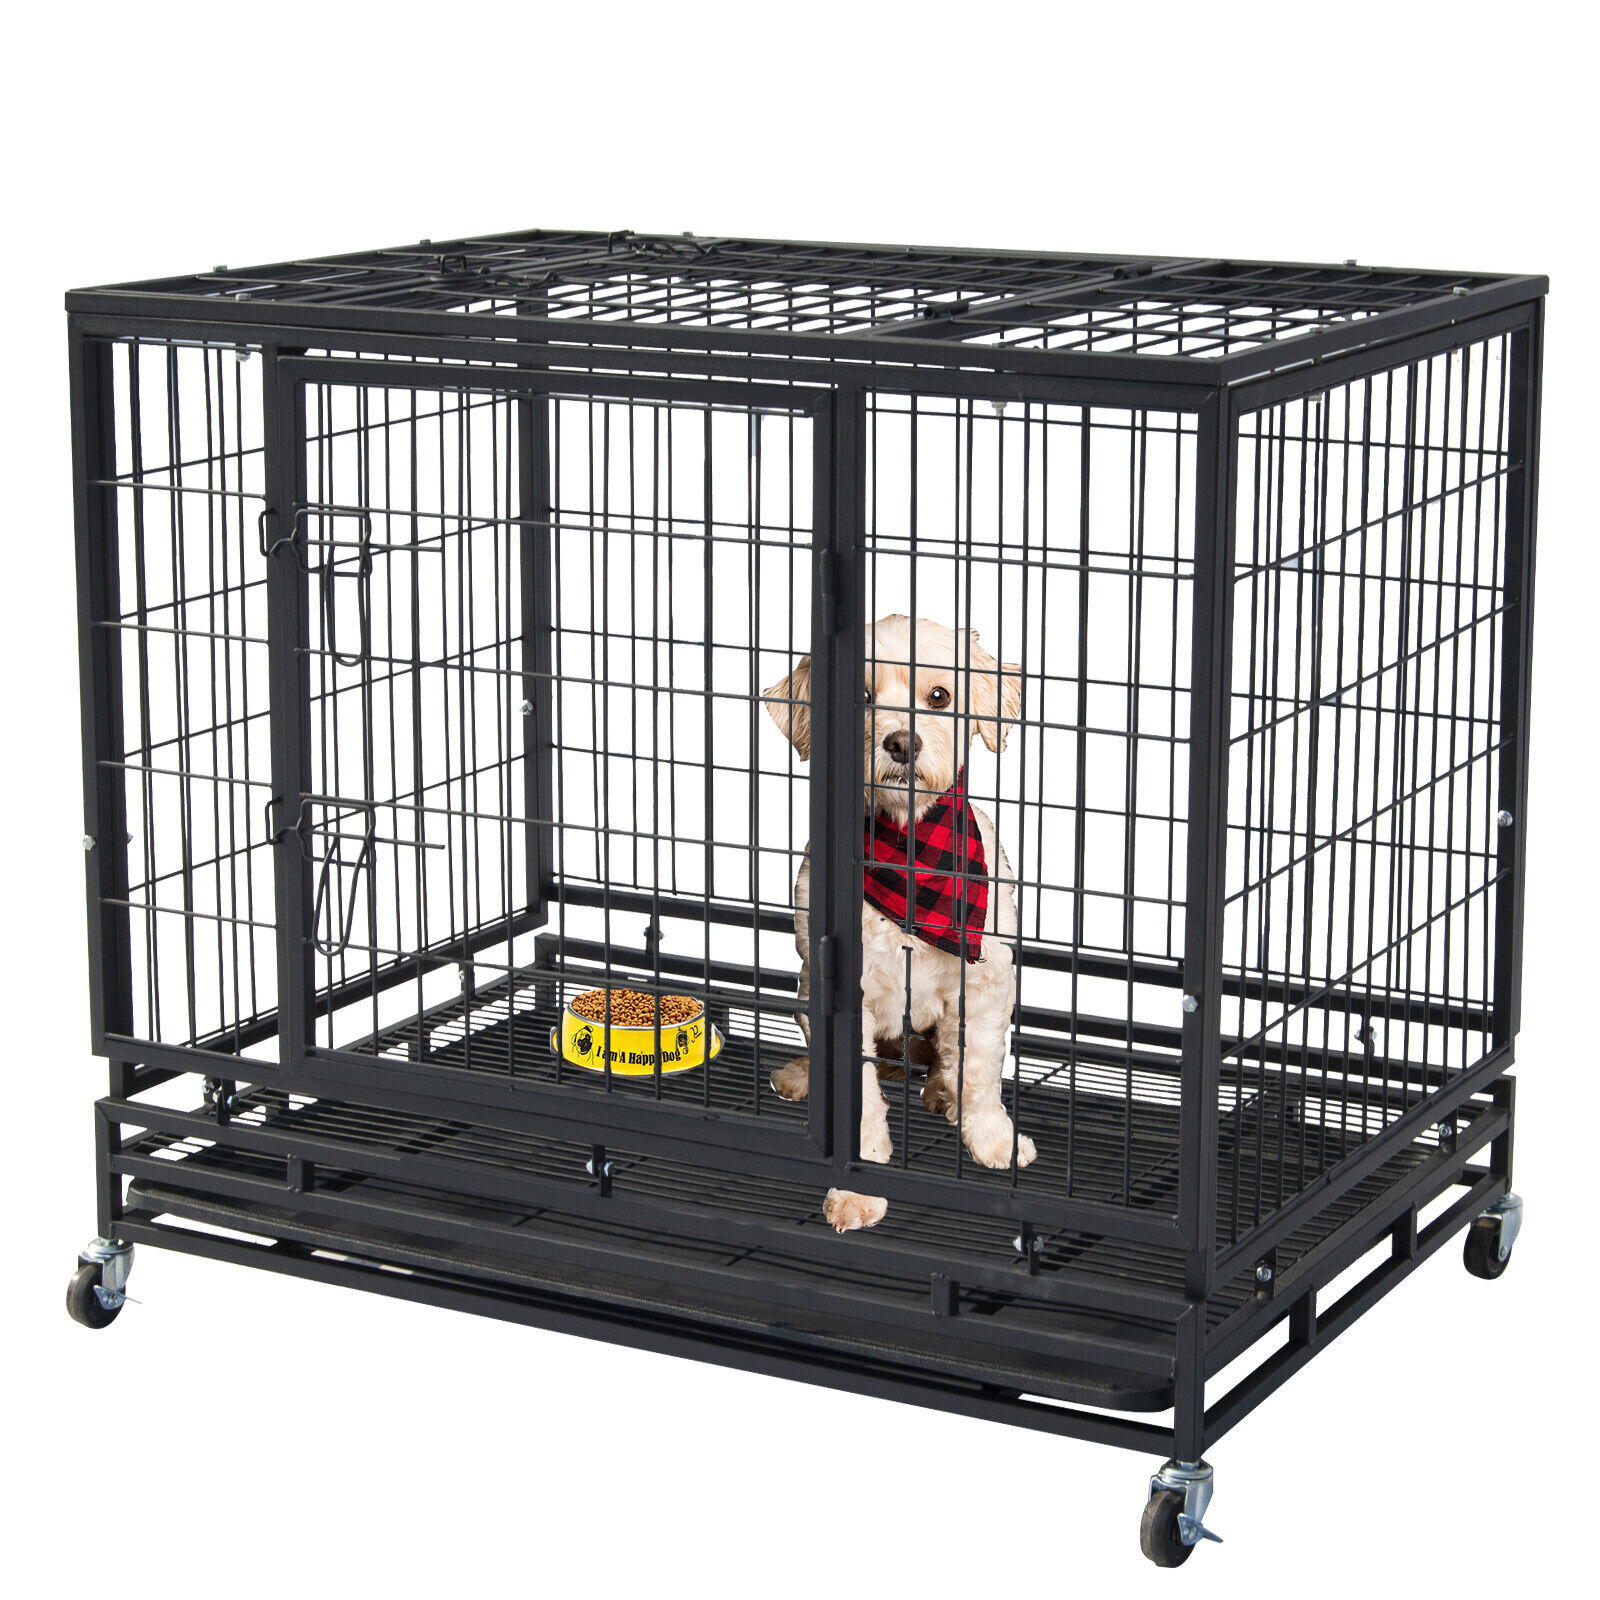 46" Pet Dog Cage Heavy Duty Strong Metal Wire Crate Kennel P